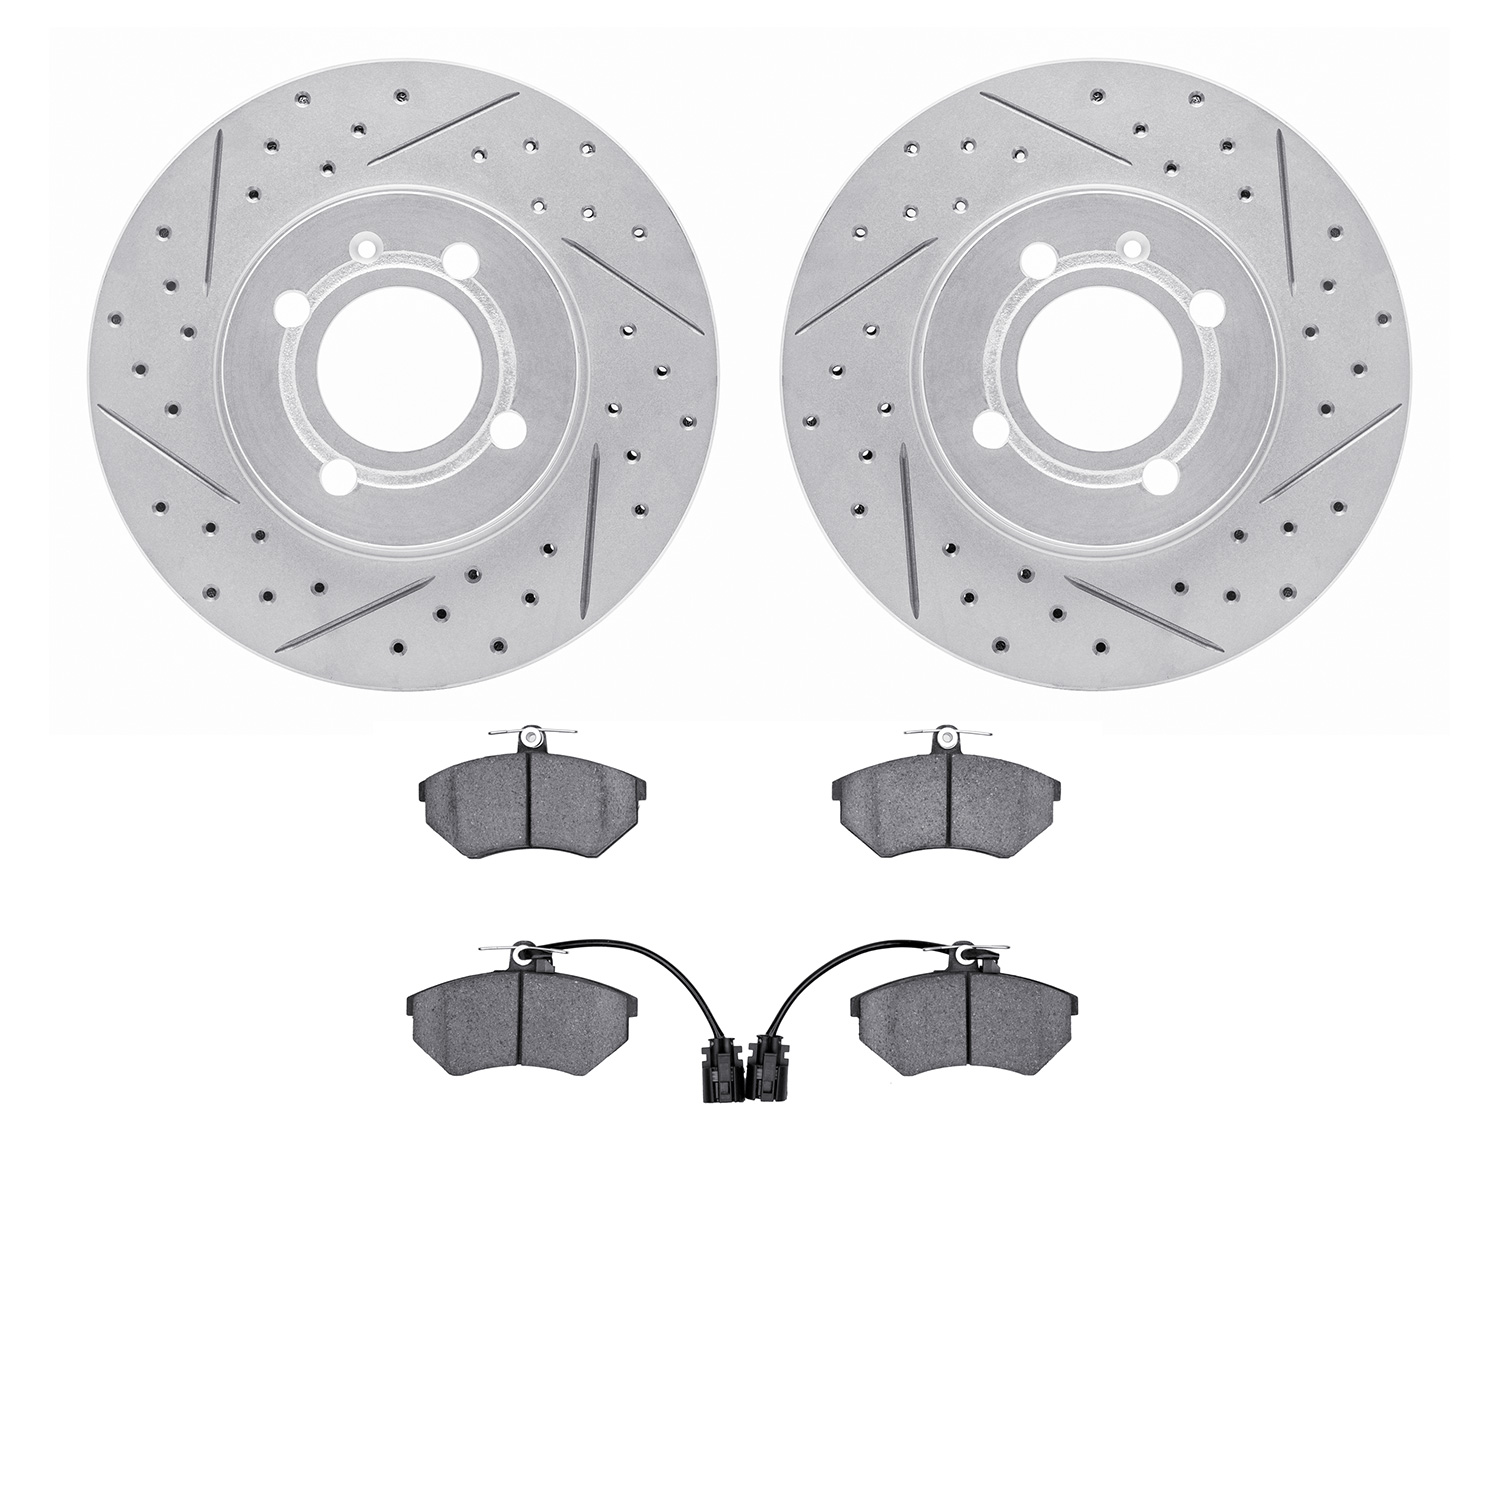 2502-74003 Geoperformance Drilled/Slotted Rotors w/5000 Advanced Brake Pads Kit, 1995-1995 Audi/Volkswagen, Position: Front